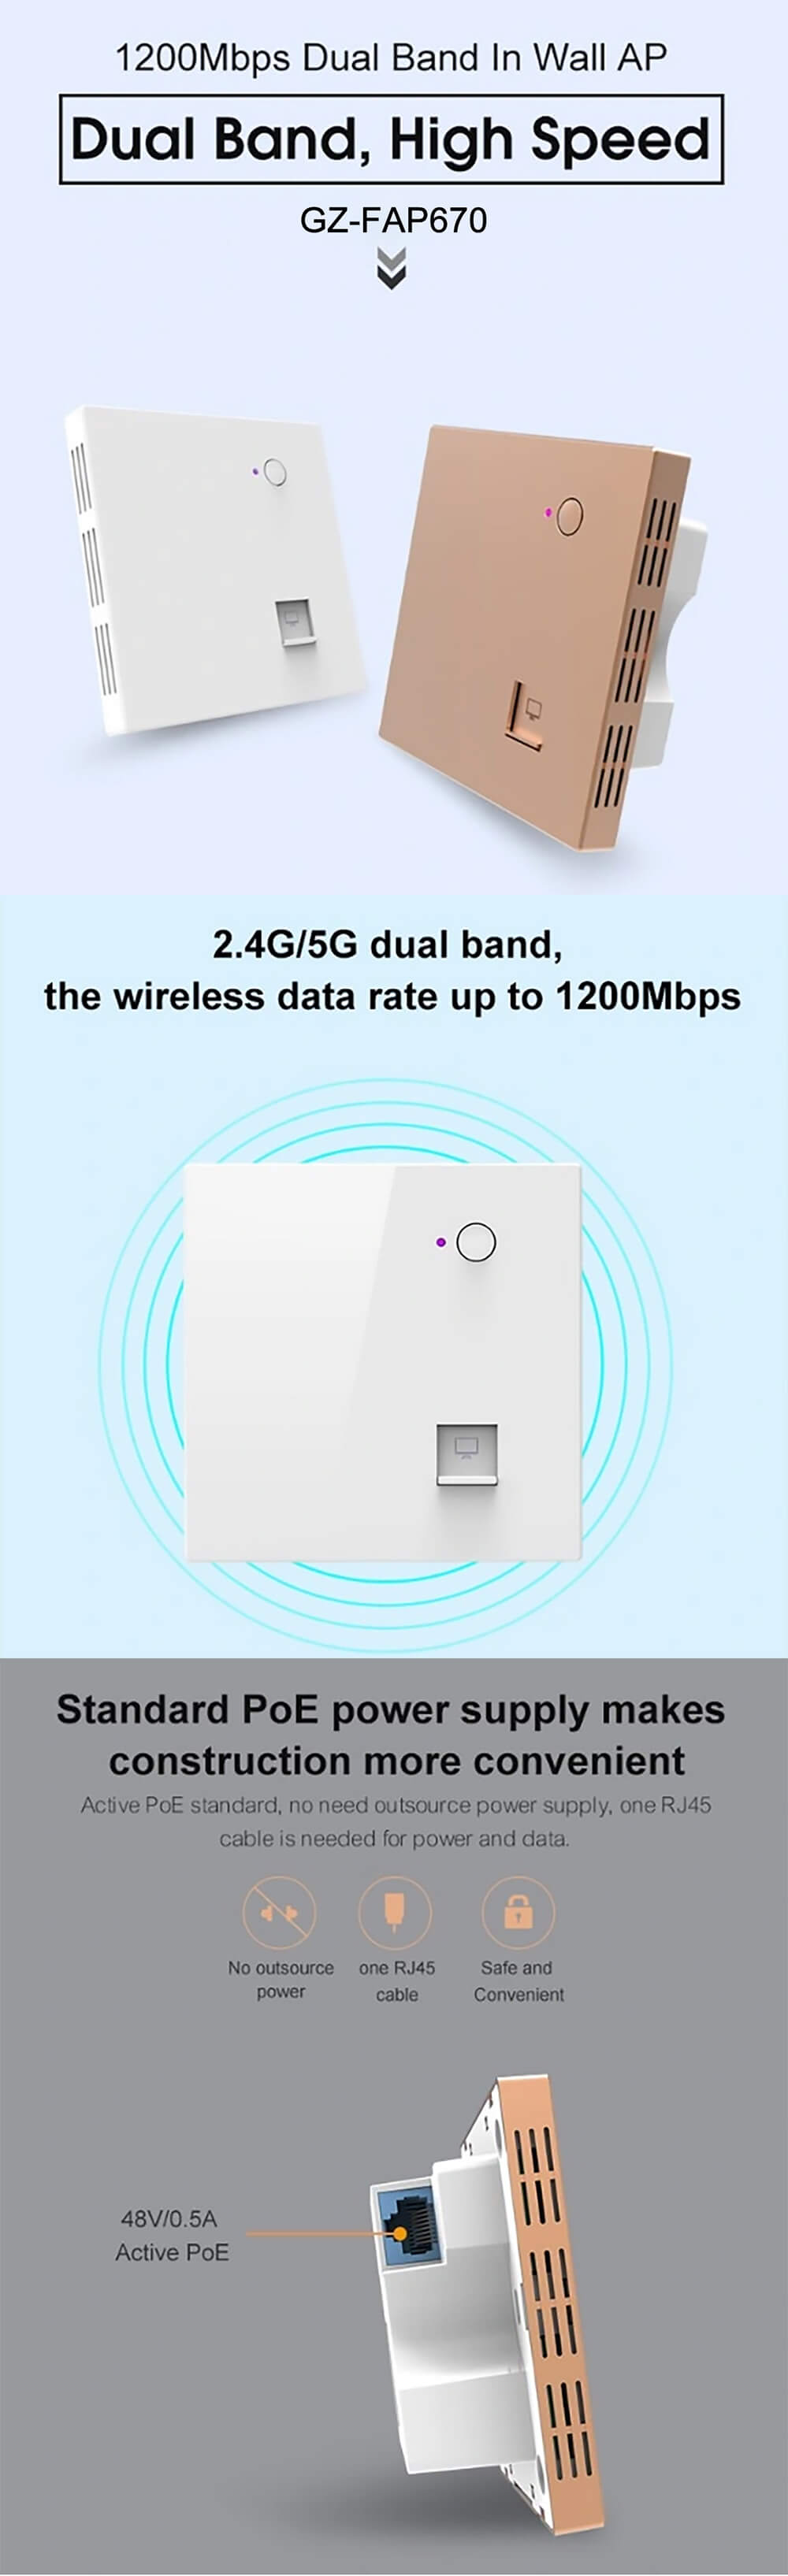 1200Mbps Dual Band Wall Mount Panel Wireless Access Point